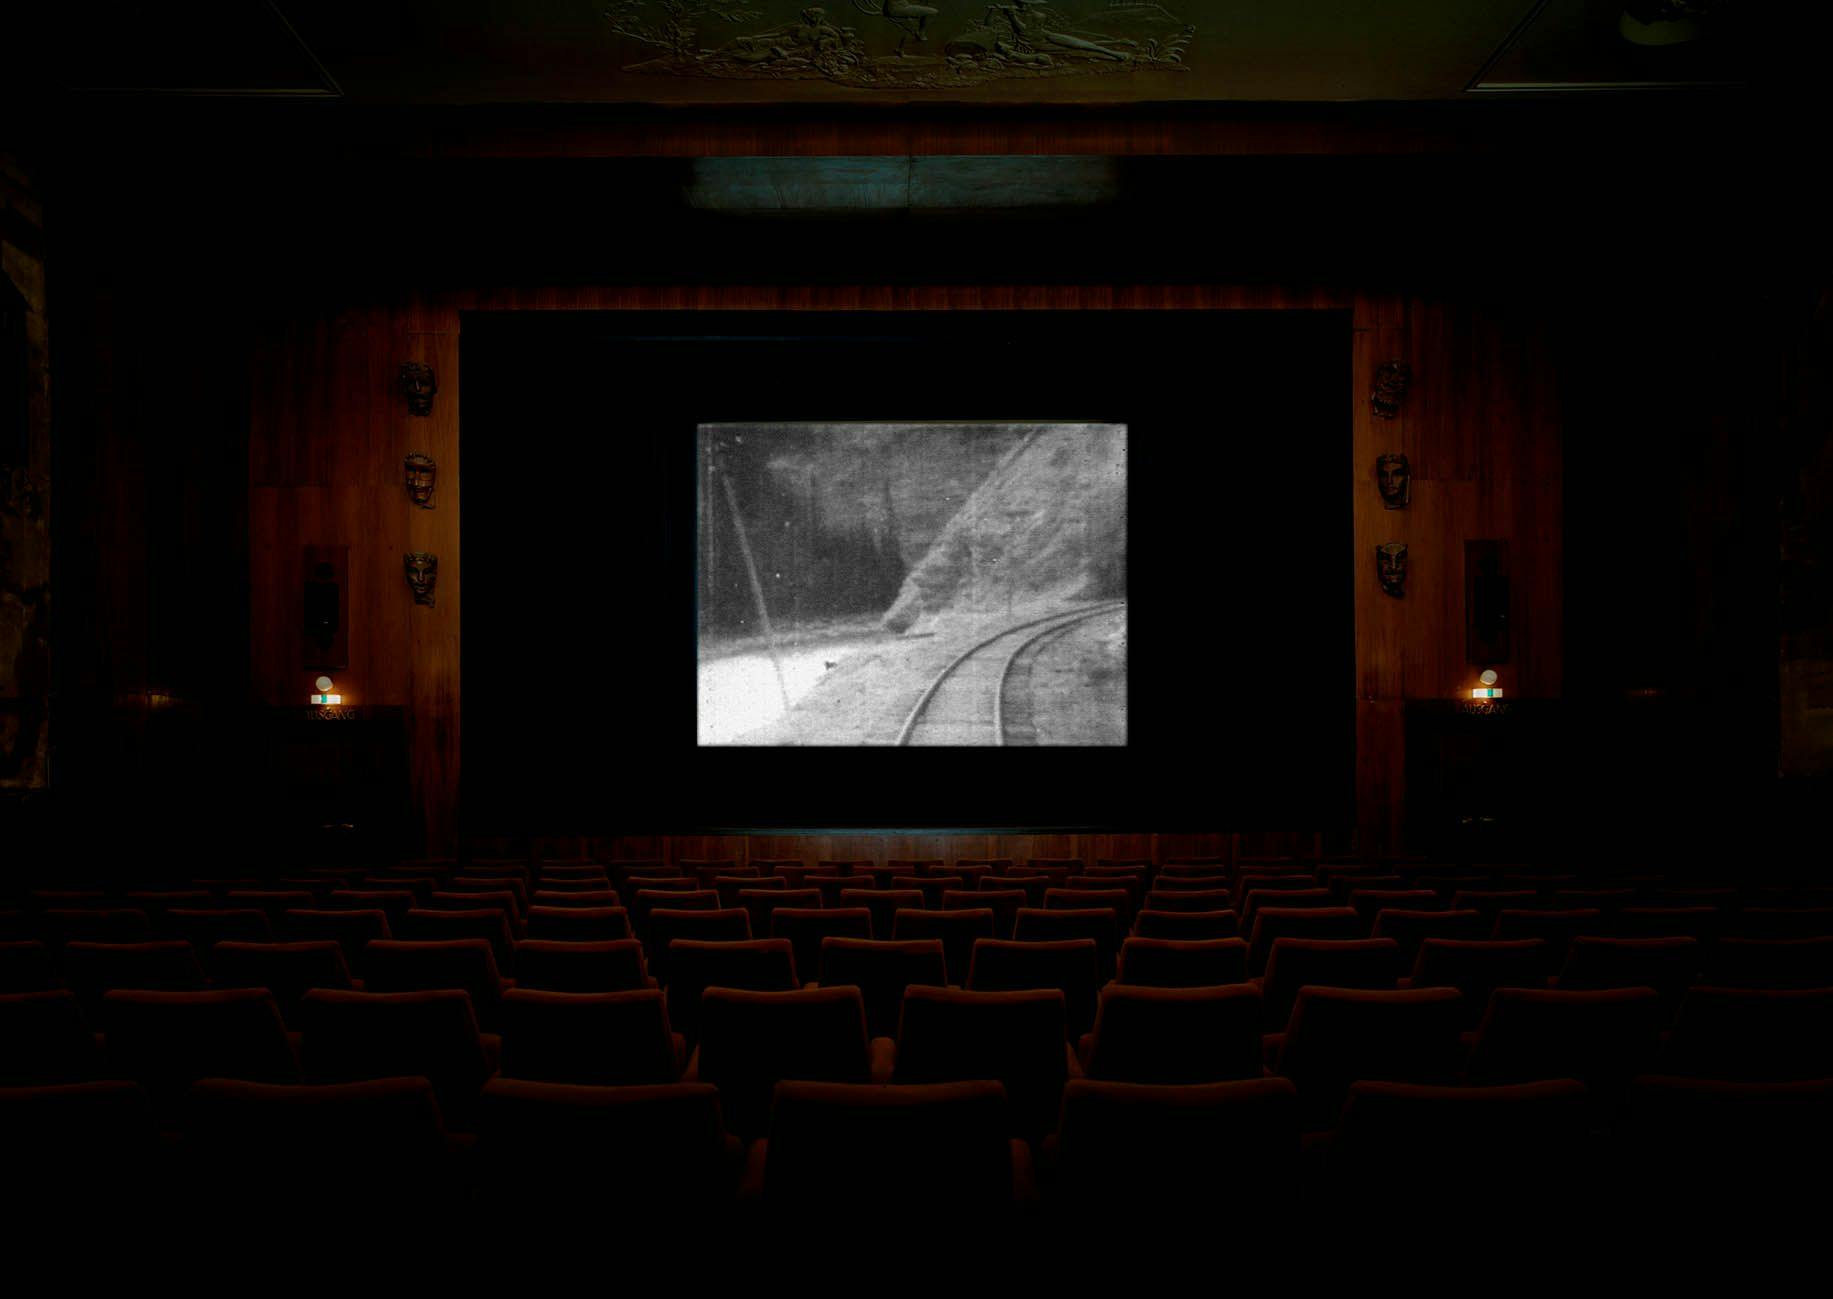 A single-channel 16mm film projection by Stan Douglas, titled Overture, dated 1986.